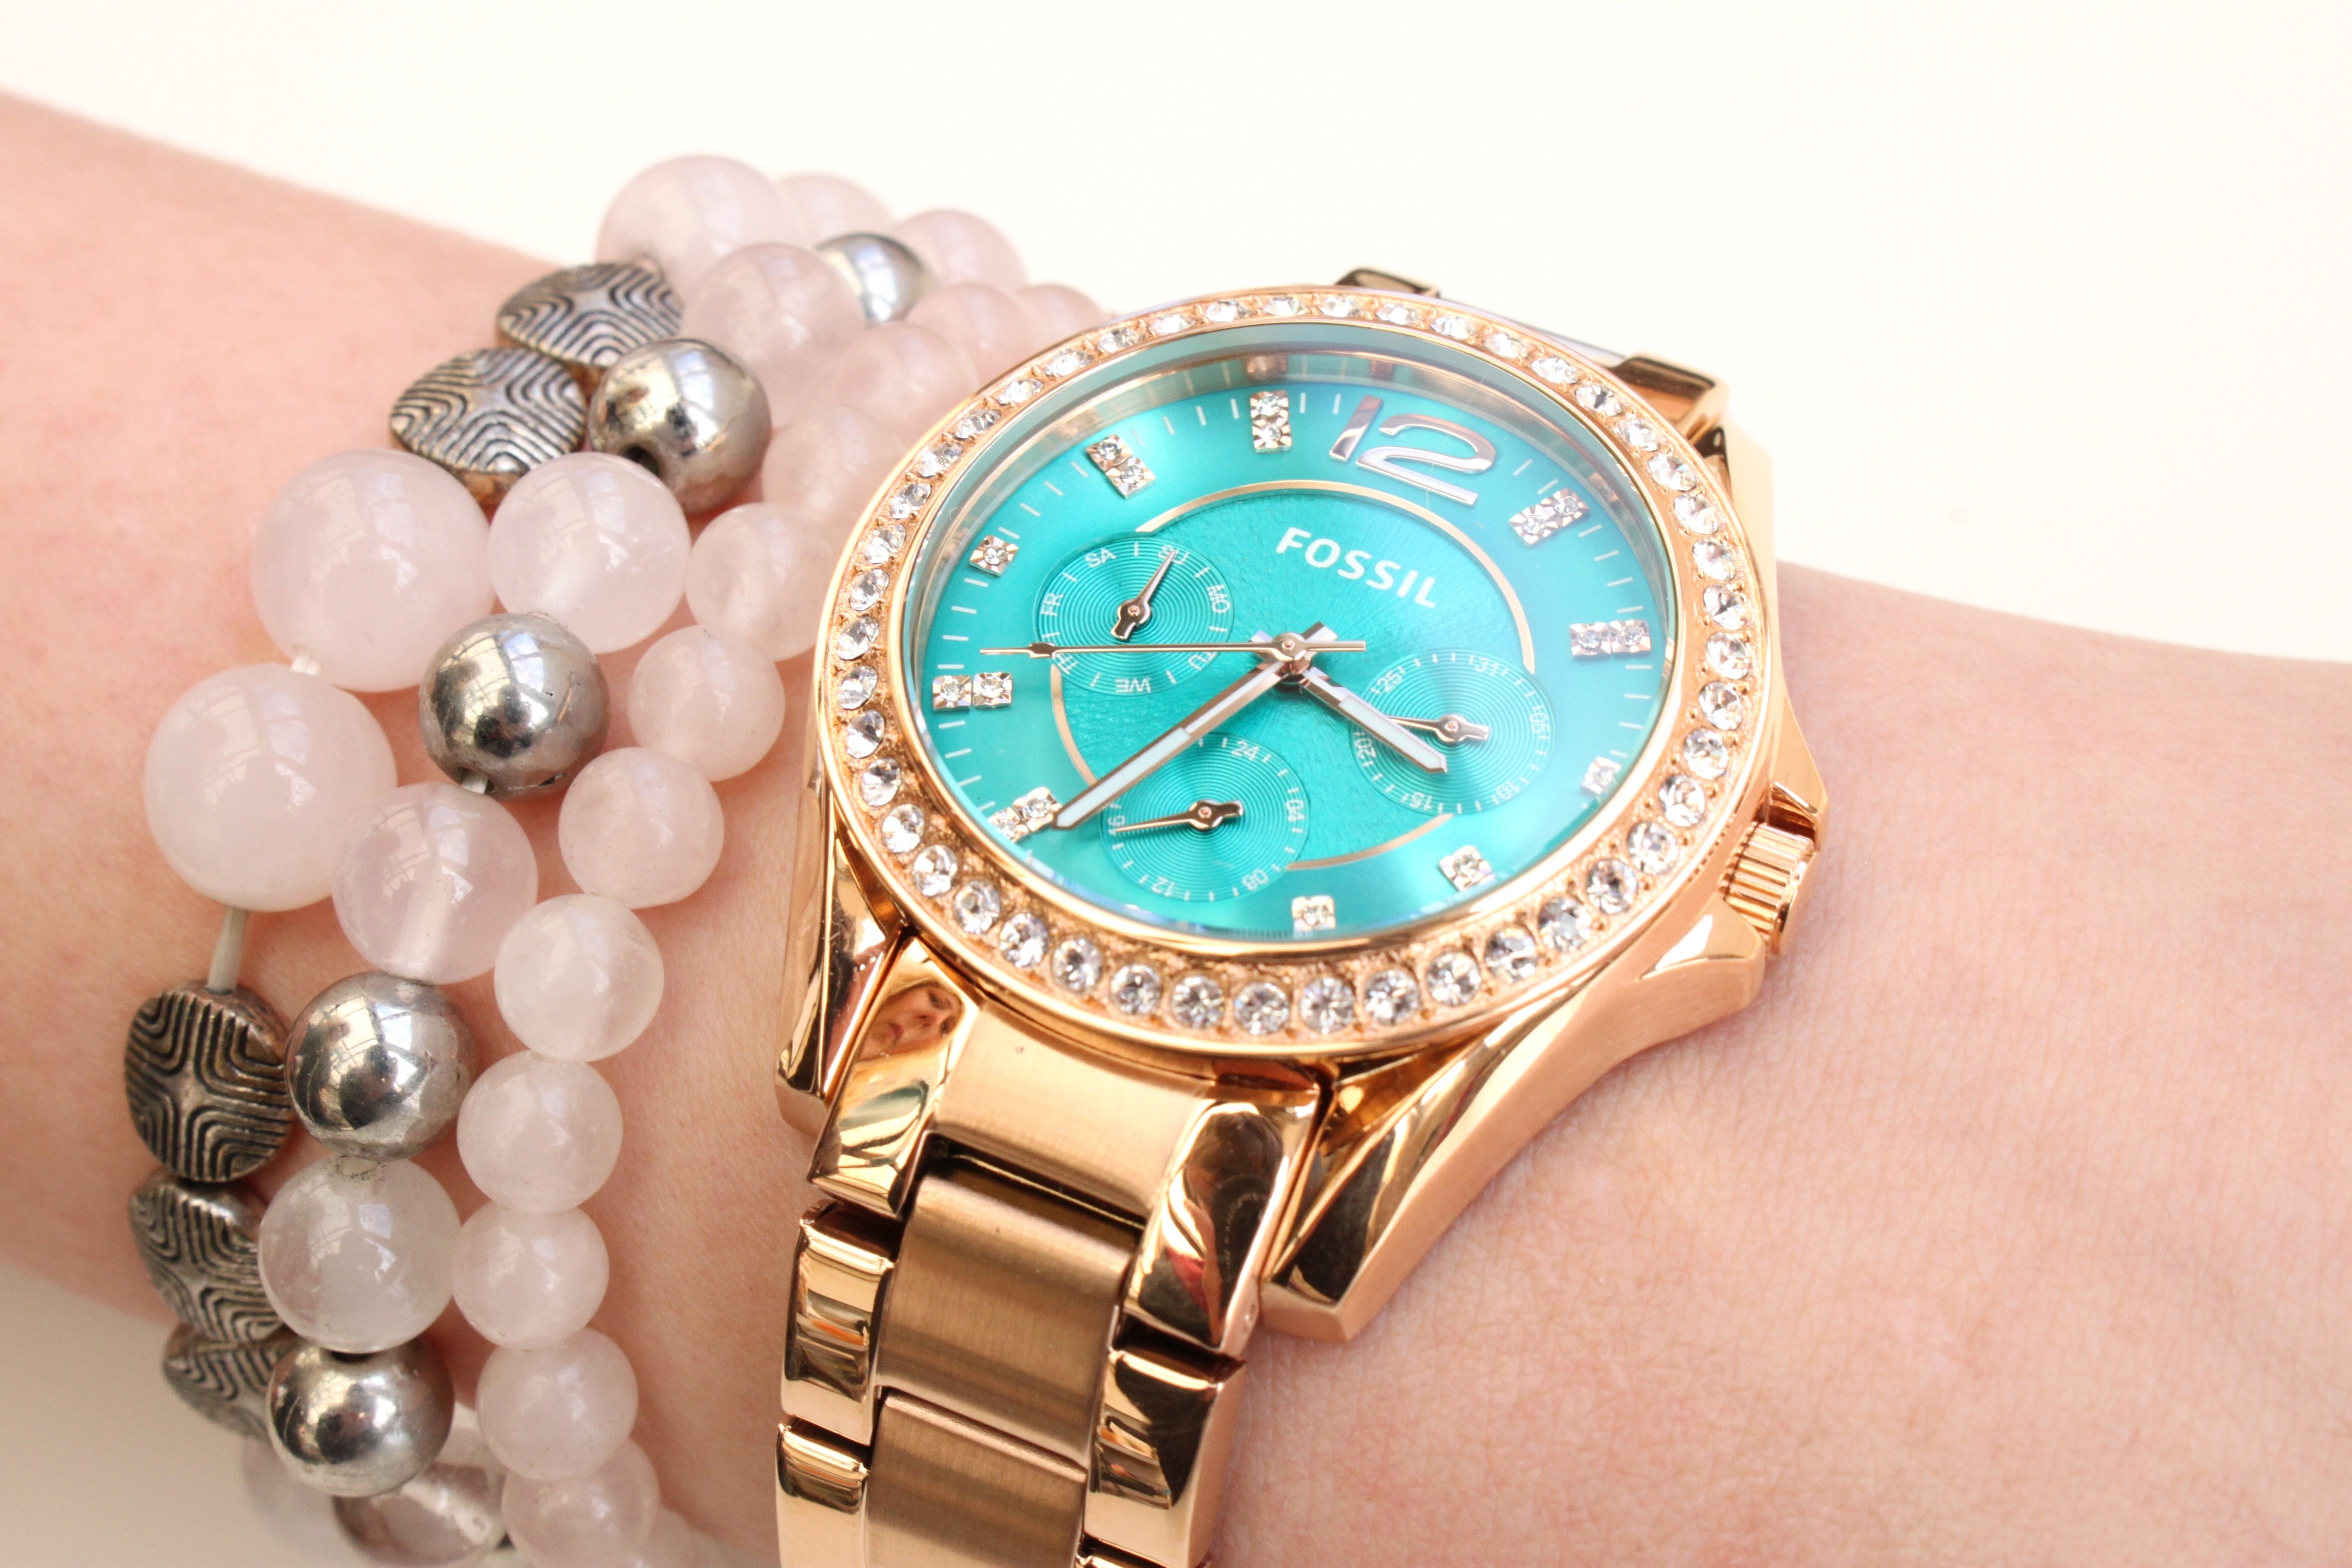 women's gold plated blue face fossil chronograph watch and bracelet